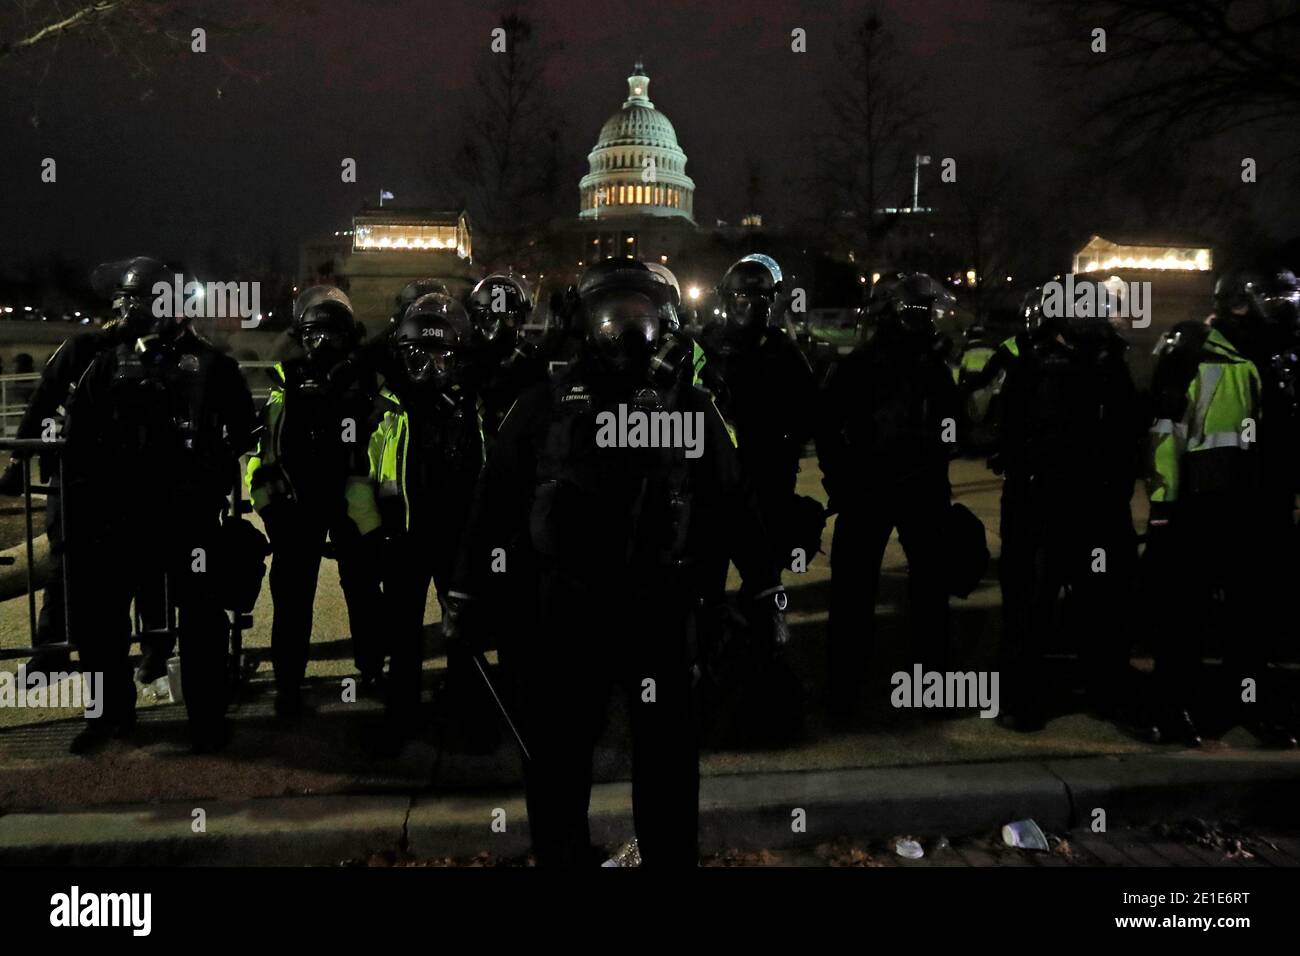 Police stand guard at the U.S. Capitol during a protest against the certification of the 2020 U.S. presidential election results by the U.S. Congress, in Washington, U.S., January 6, 2021. REUTERS/Jim Bourg Stock Photo